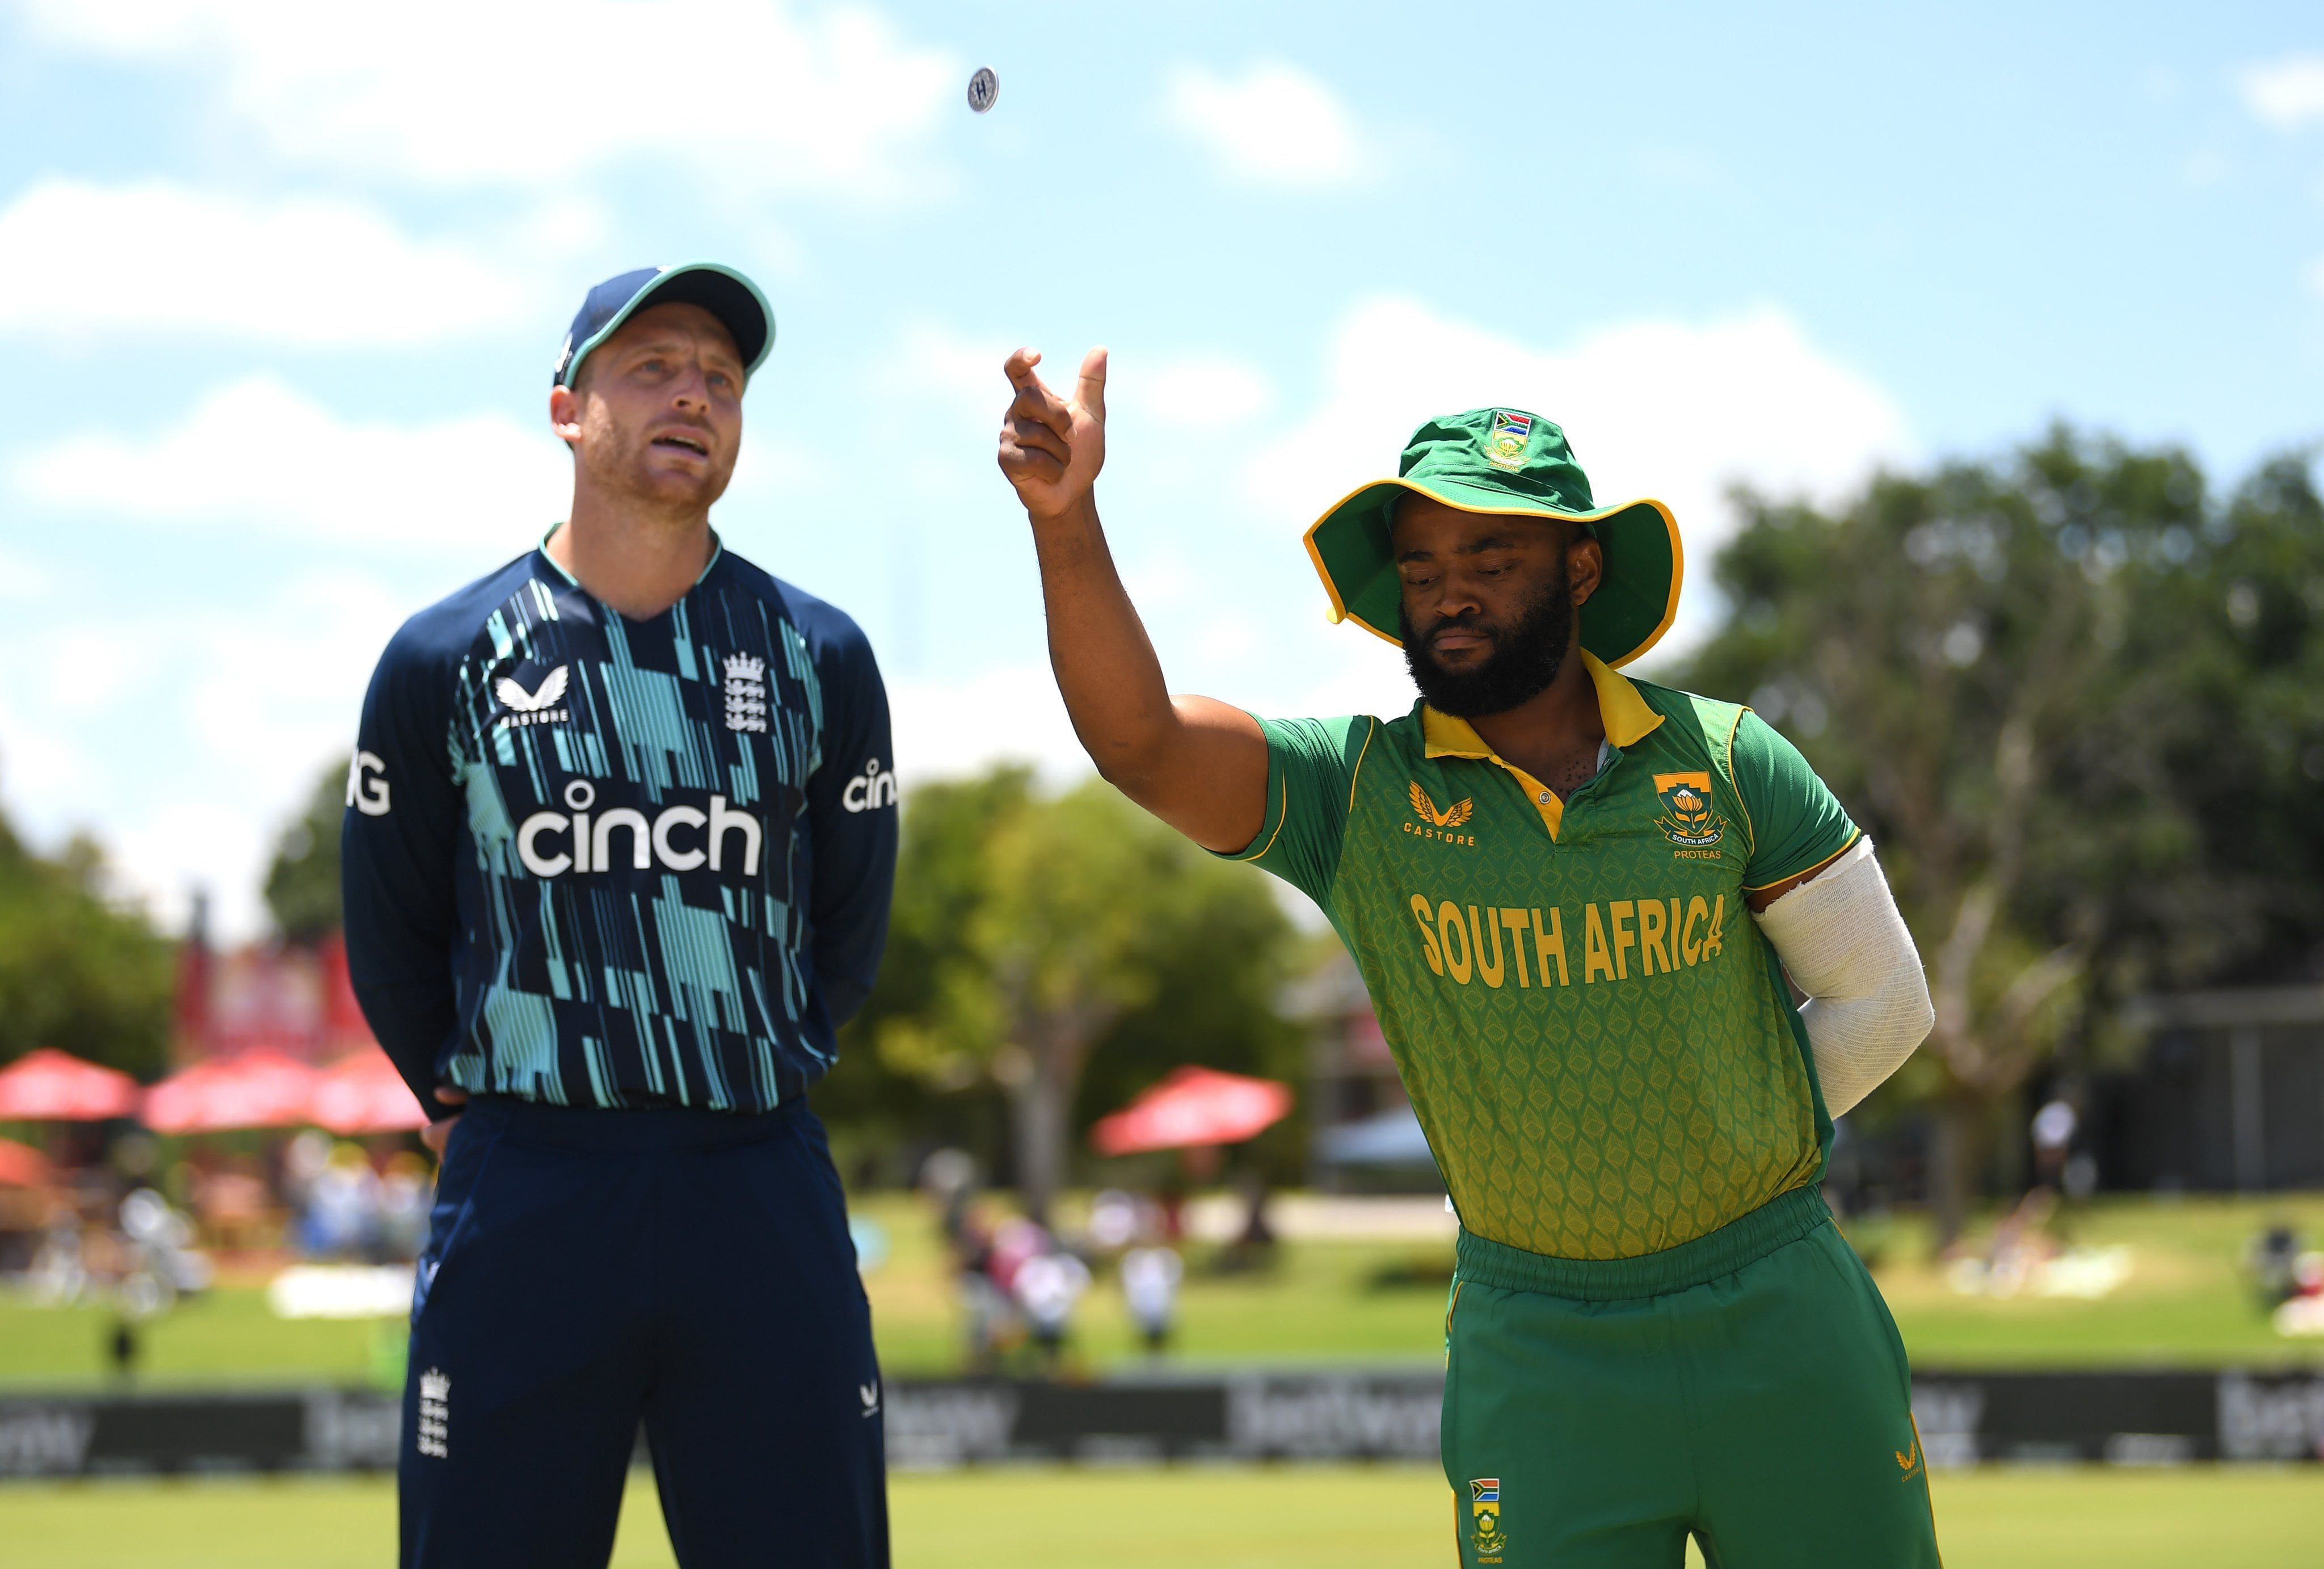 South Africa vs England Live Cricket Score and Updates: SA vs ENG 2nd ODI  match Live cricket score at Mangaung Oval, Bloemfontein